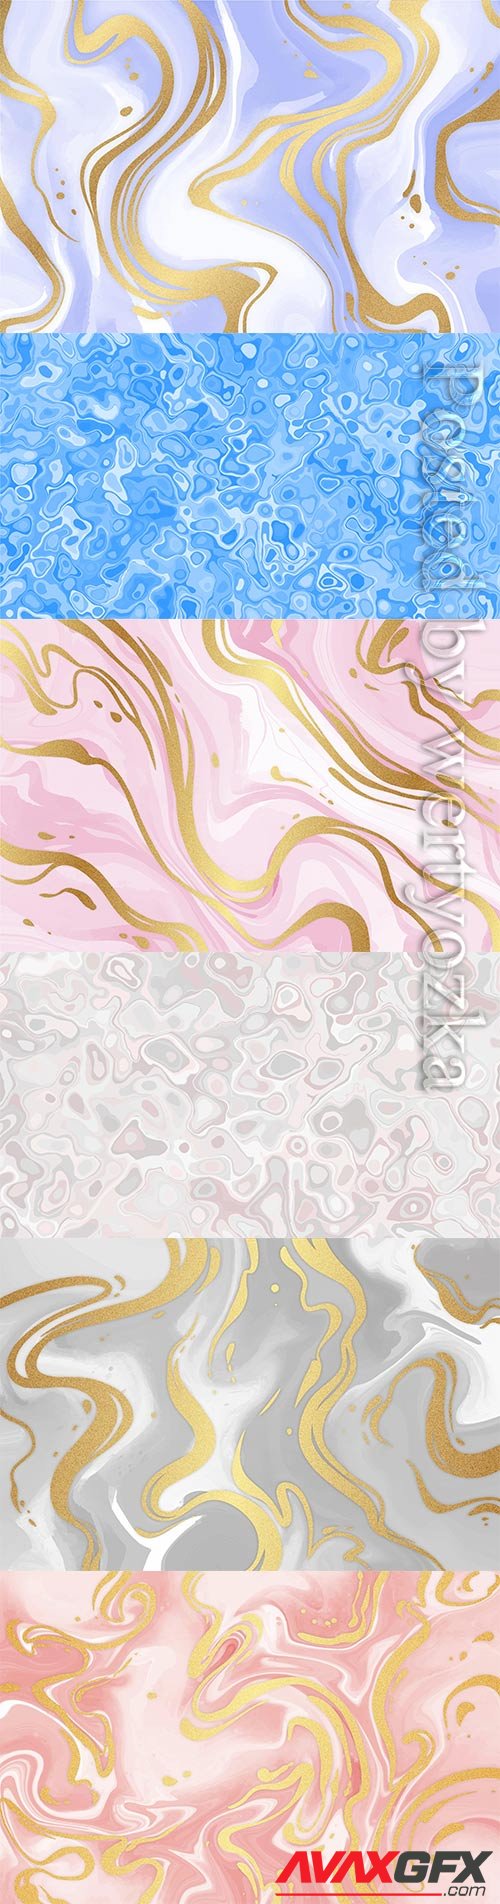 Marble backgrounds in vector